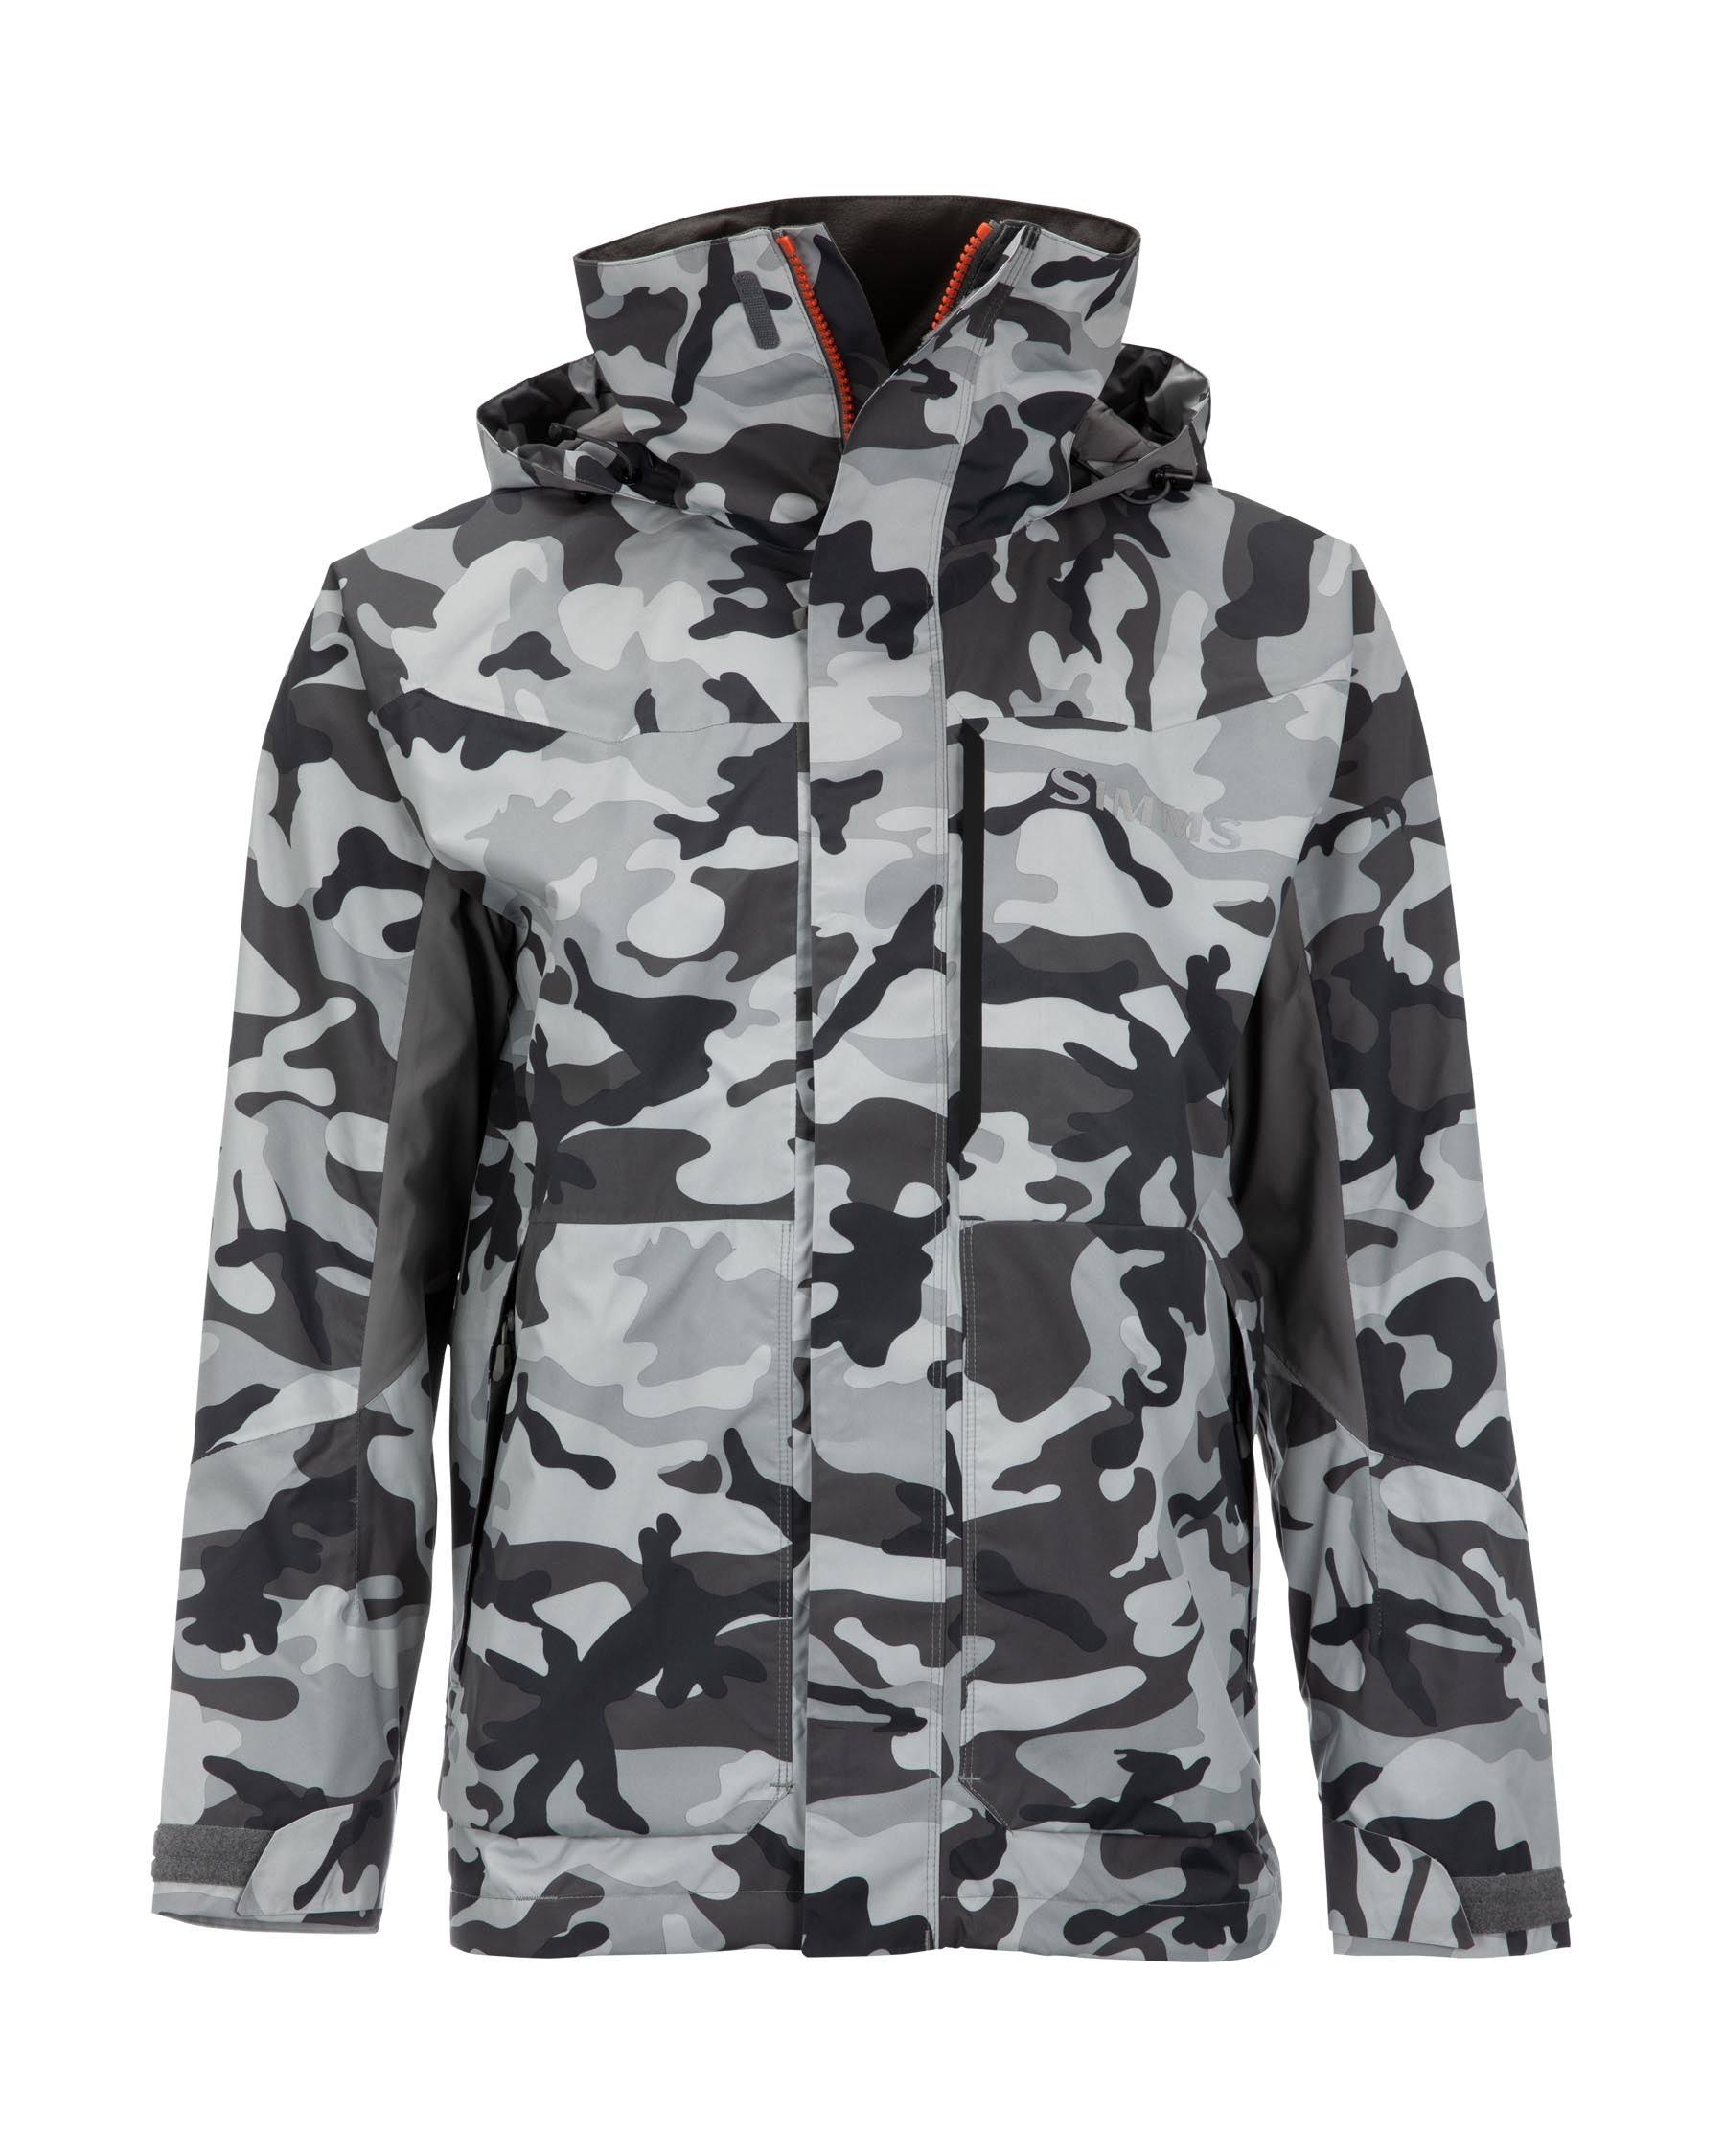 Simms Challenger Jacket - Woodland Camo Steel - Size L